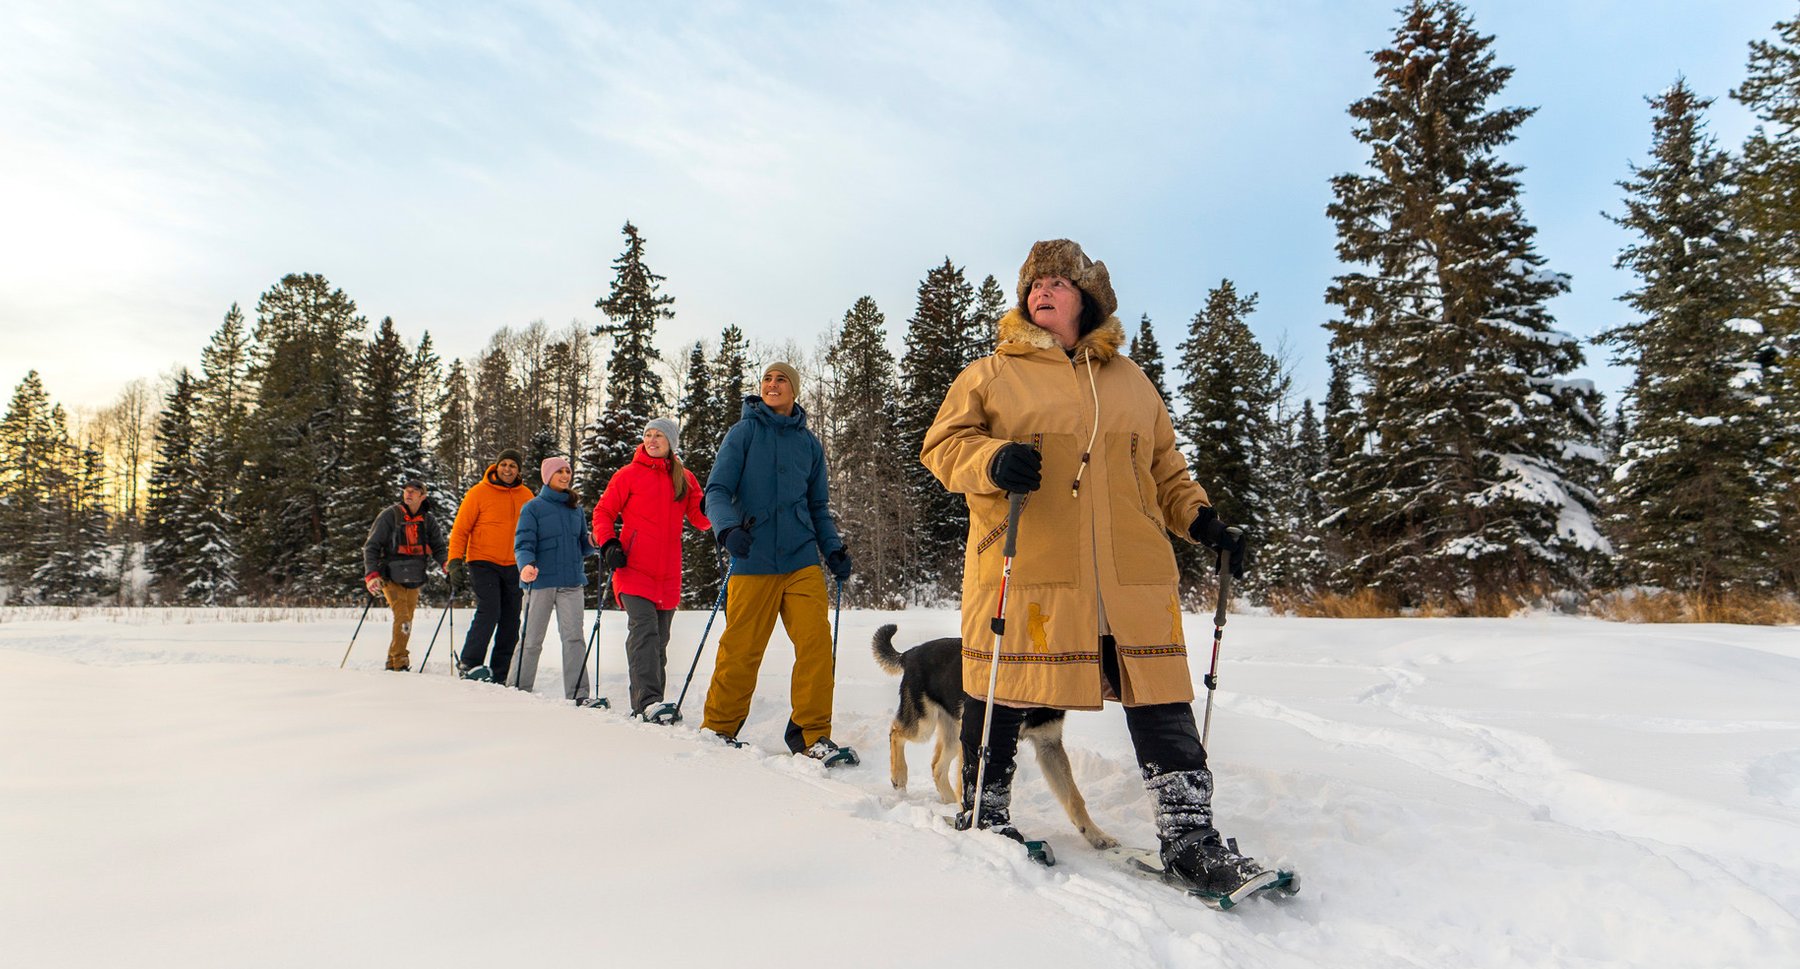 A group of people on a guided snowshoe walk across a lake.